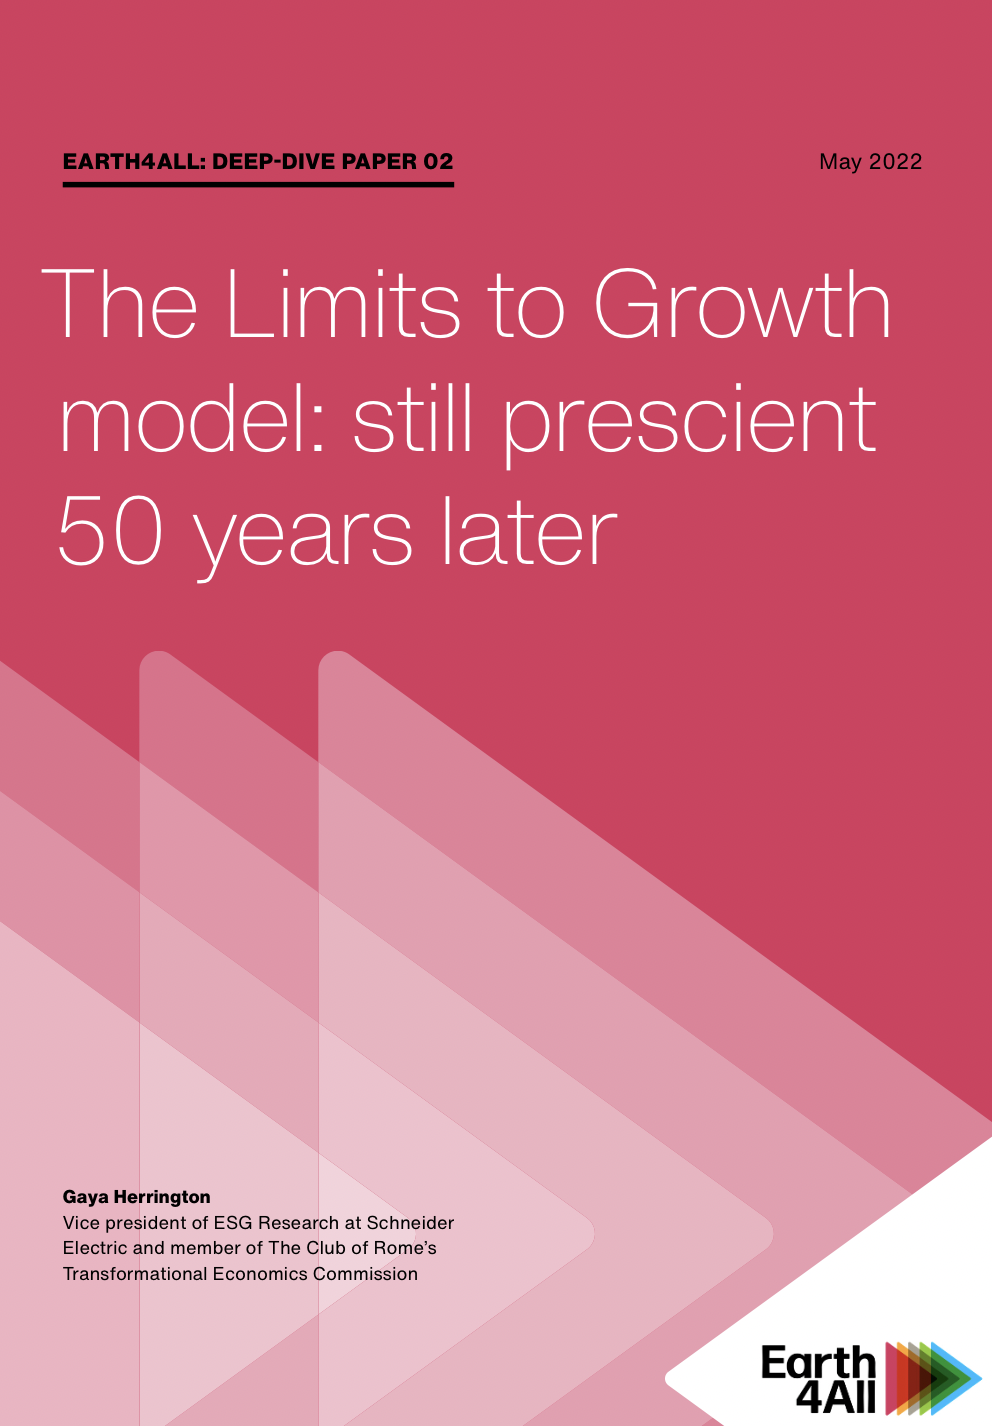 The Limits to Growth model: still prescient 50 years later